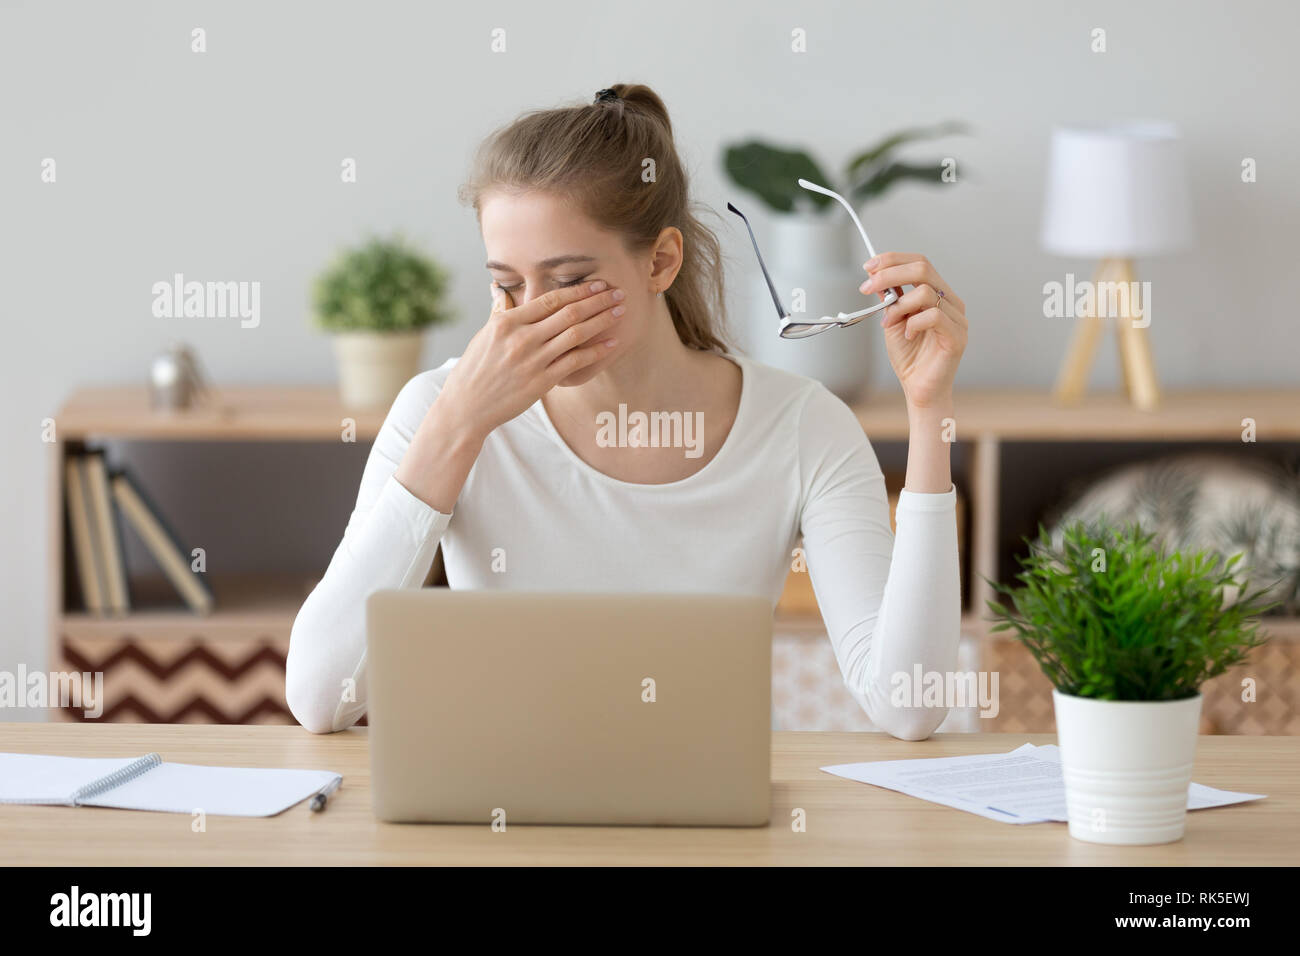 Tired woman rubbing eyes taking off glasses after computer work Stock Photo